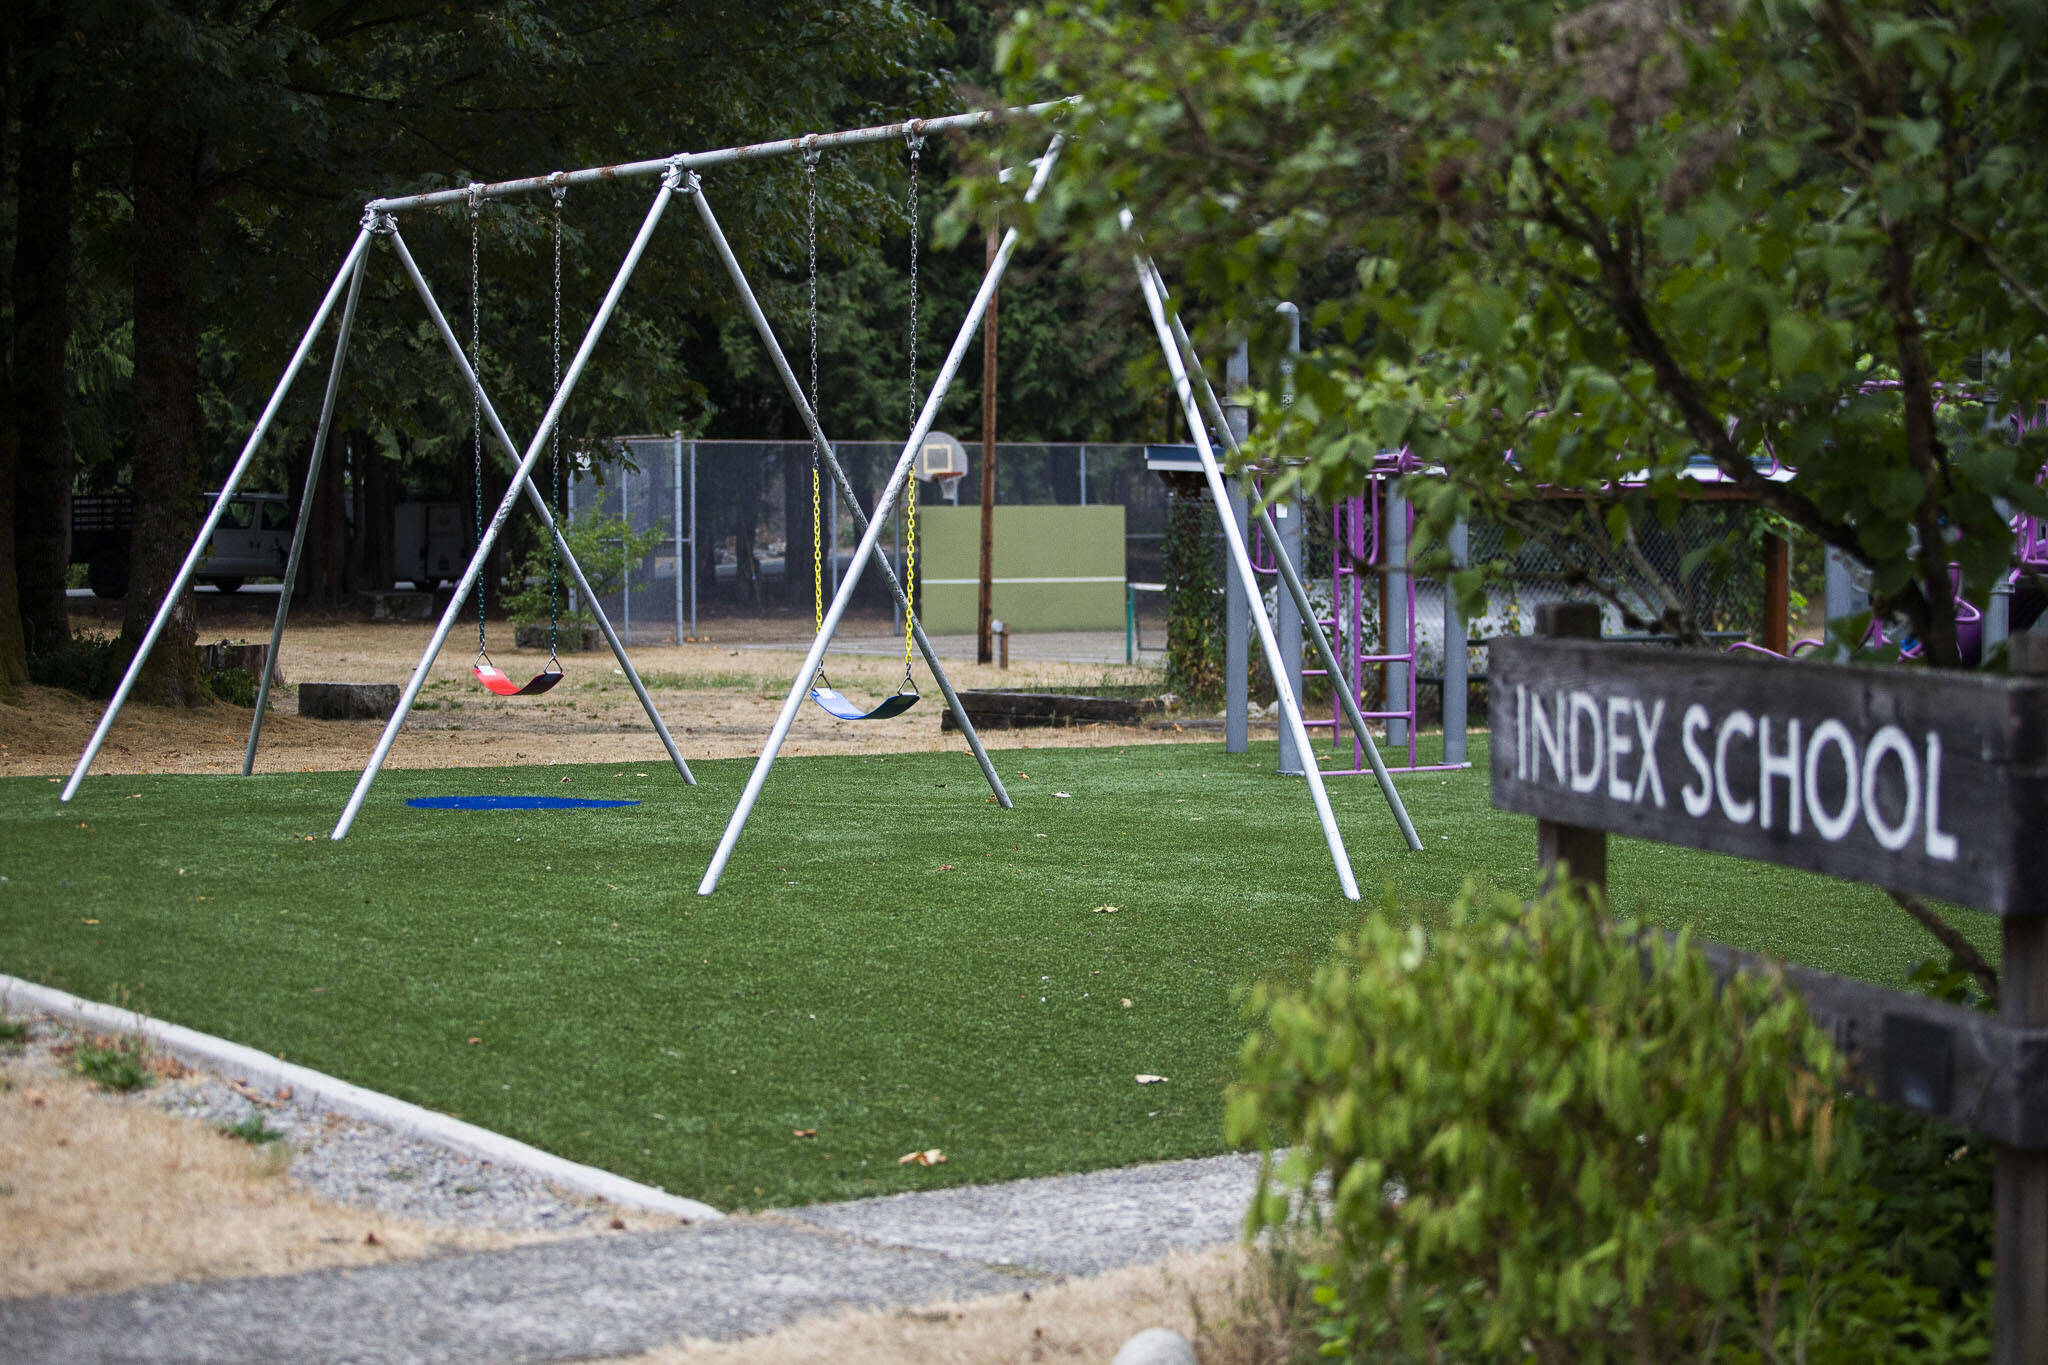 An empty playground at the Index School on Tuesday, Sept. 13, 2022 in Index, Washington. (Olivia Vanni / The Herald)